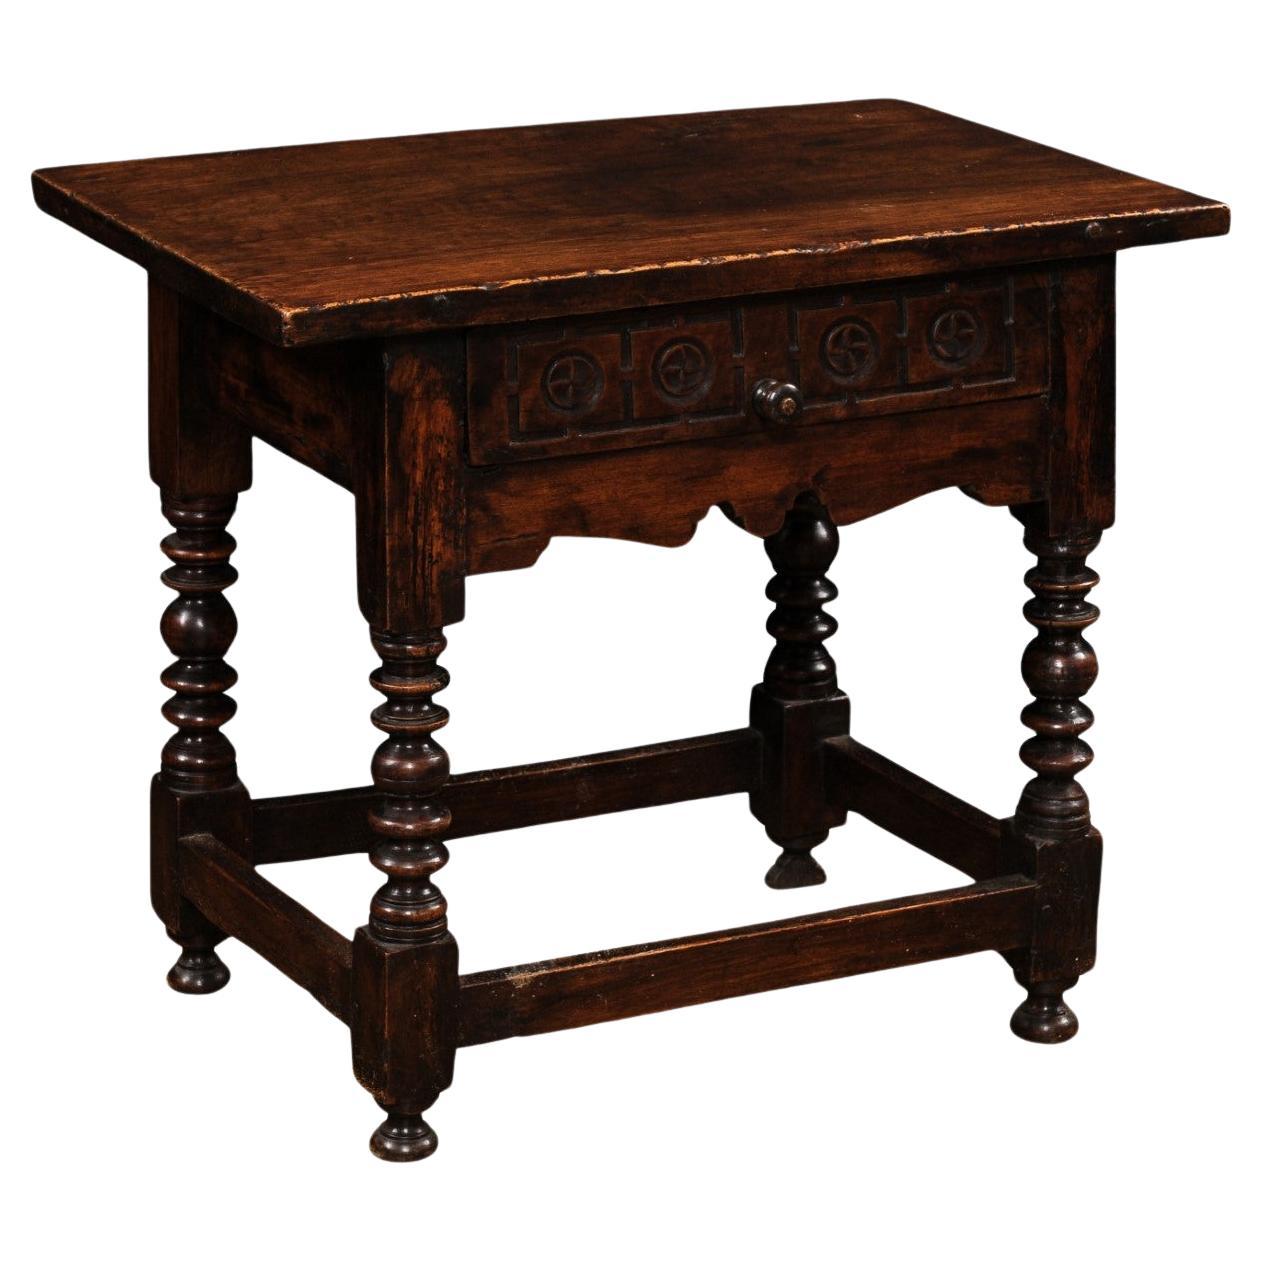 Spanish 1770s Walnut Side Table with Spool Legs and Rosettes Carved Drawer For Sale